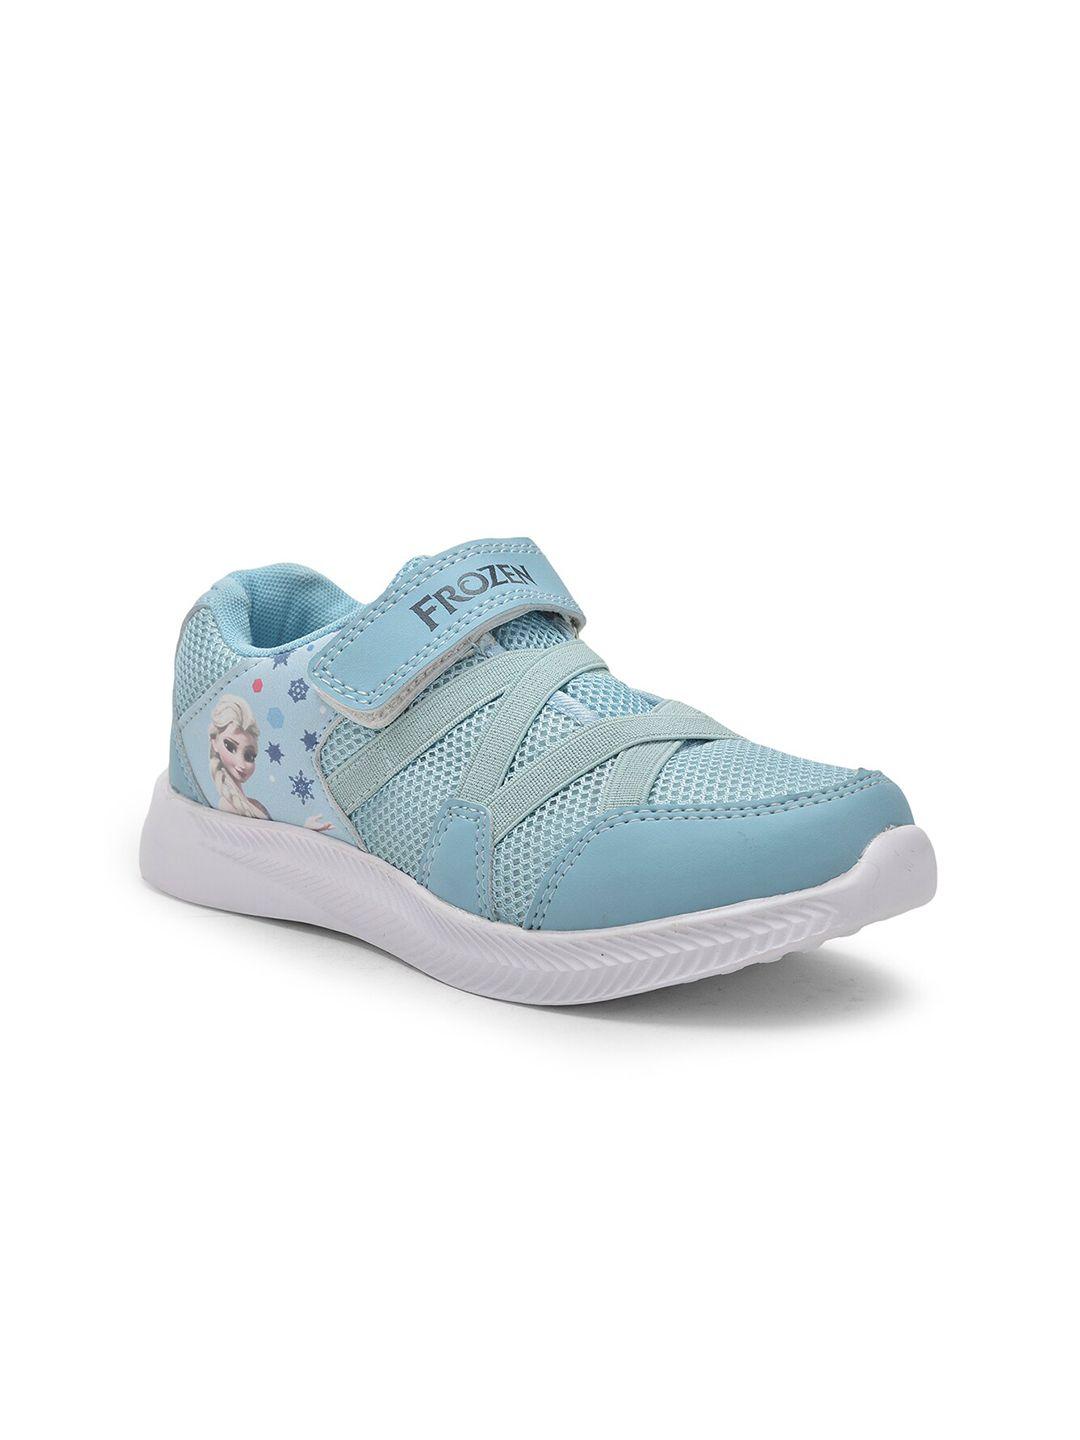 toothless Girls Blue Walking Shoes